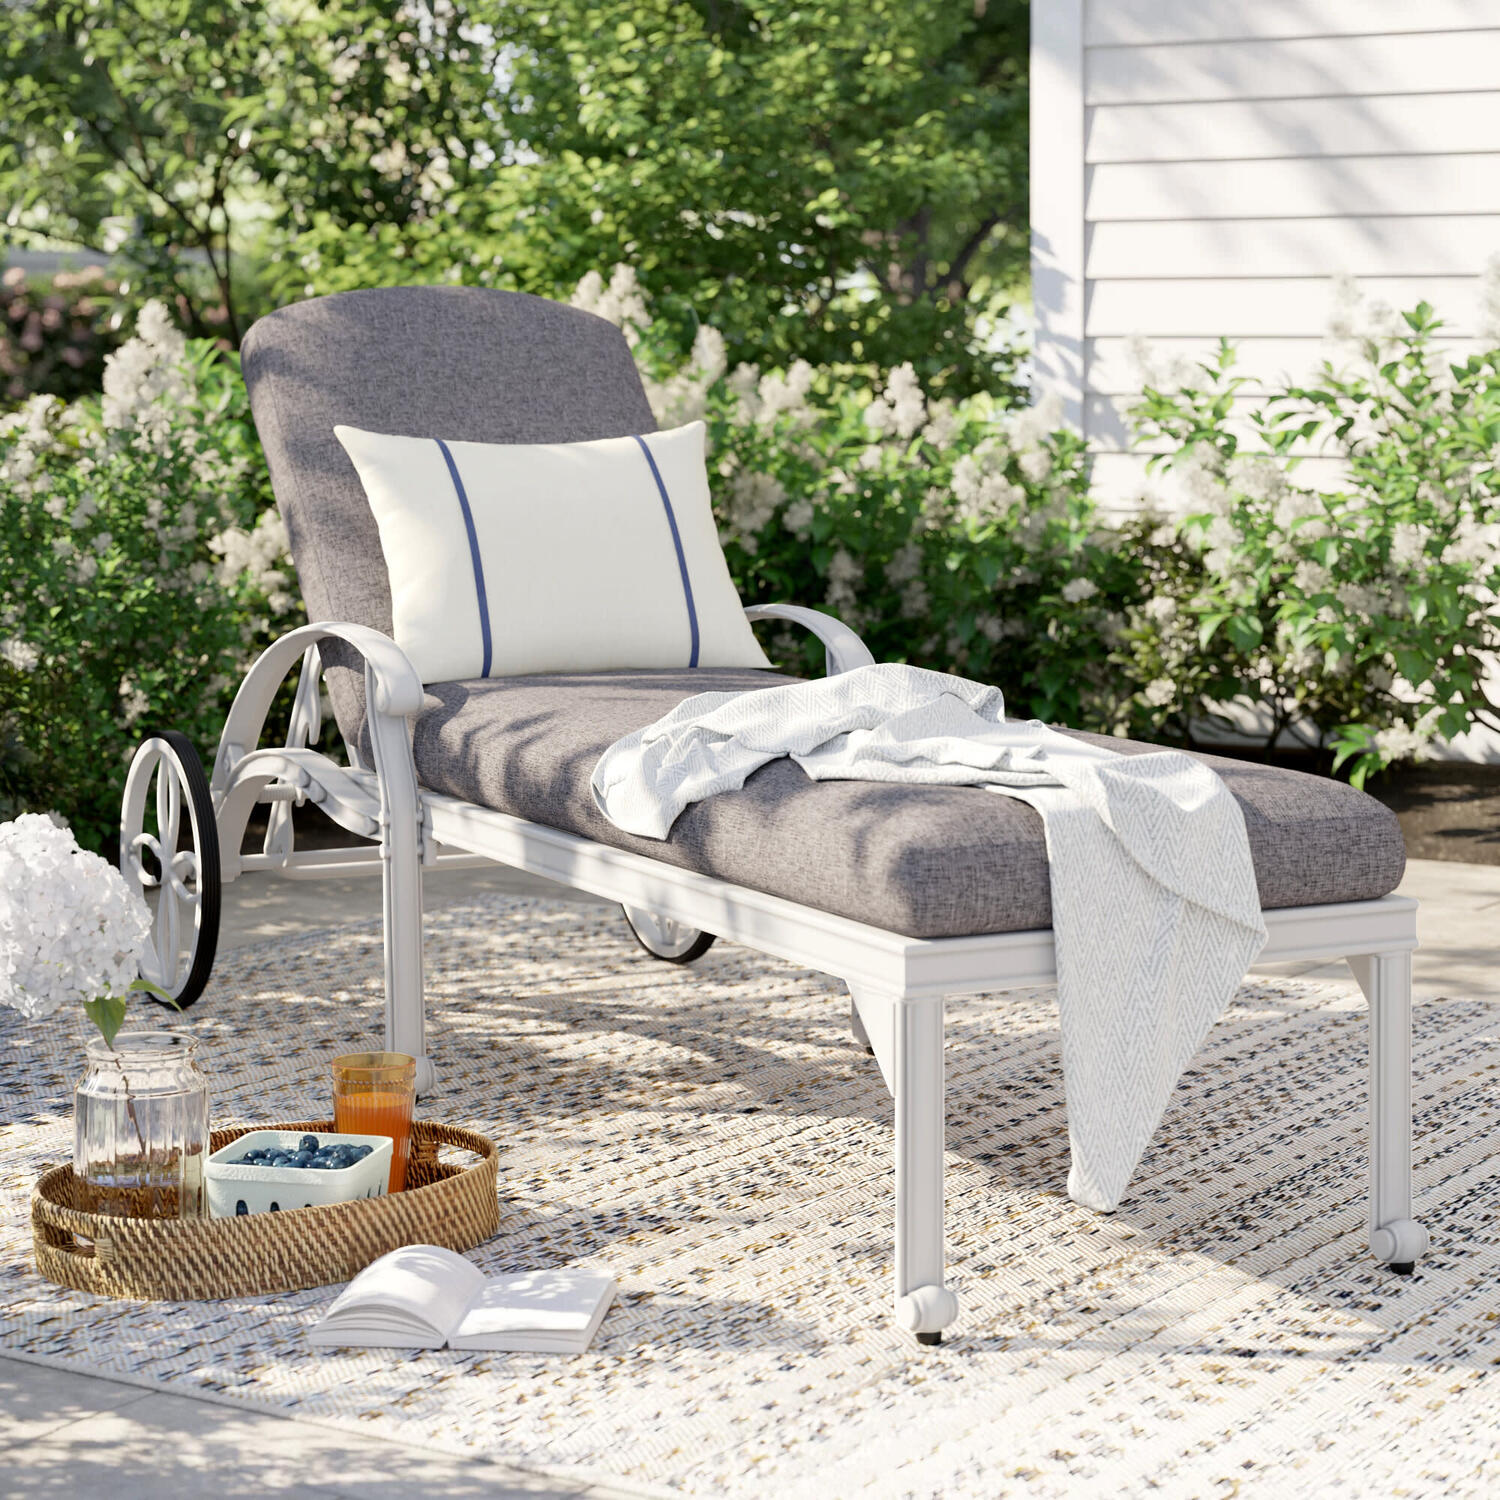 Homestyles Capri Aluminum Outdoor Chaise Lounge in White - image 2 of 2